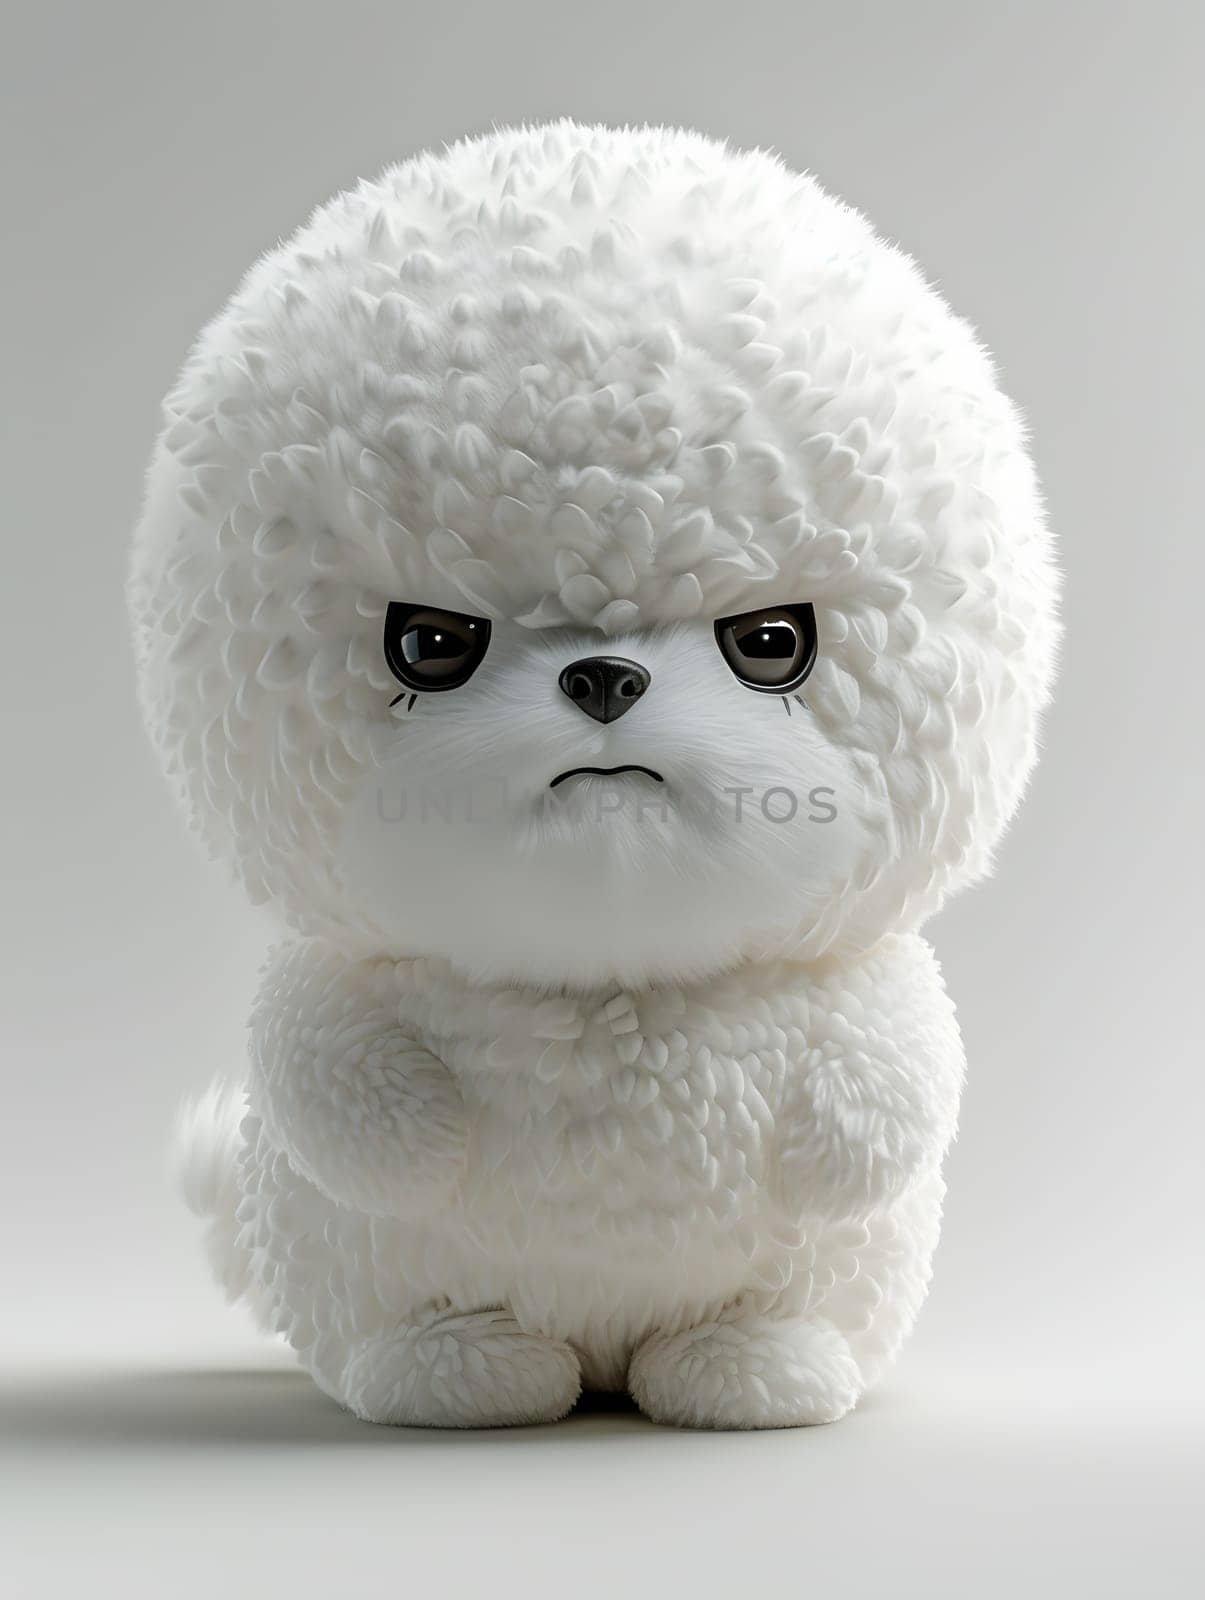 A white stuffed toy with an angry expression on its face is placed on a white surface. The toy has a snout, fur, and features resembling a companion dog